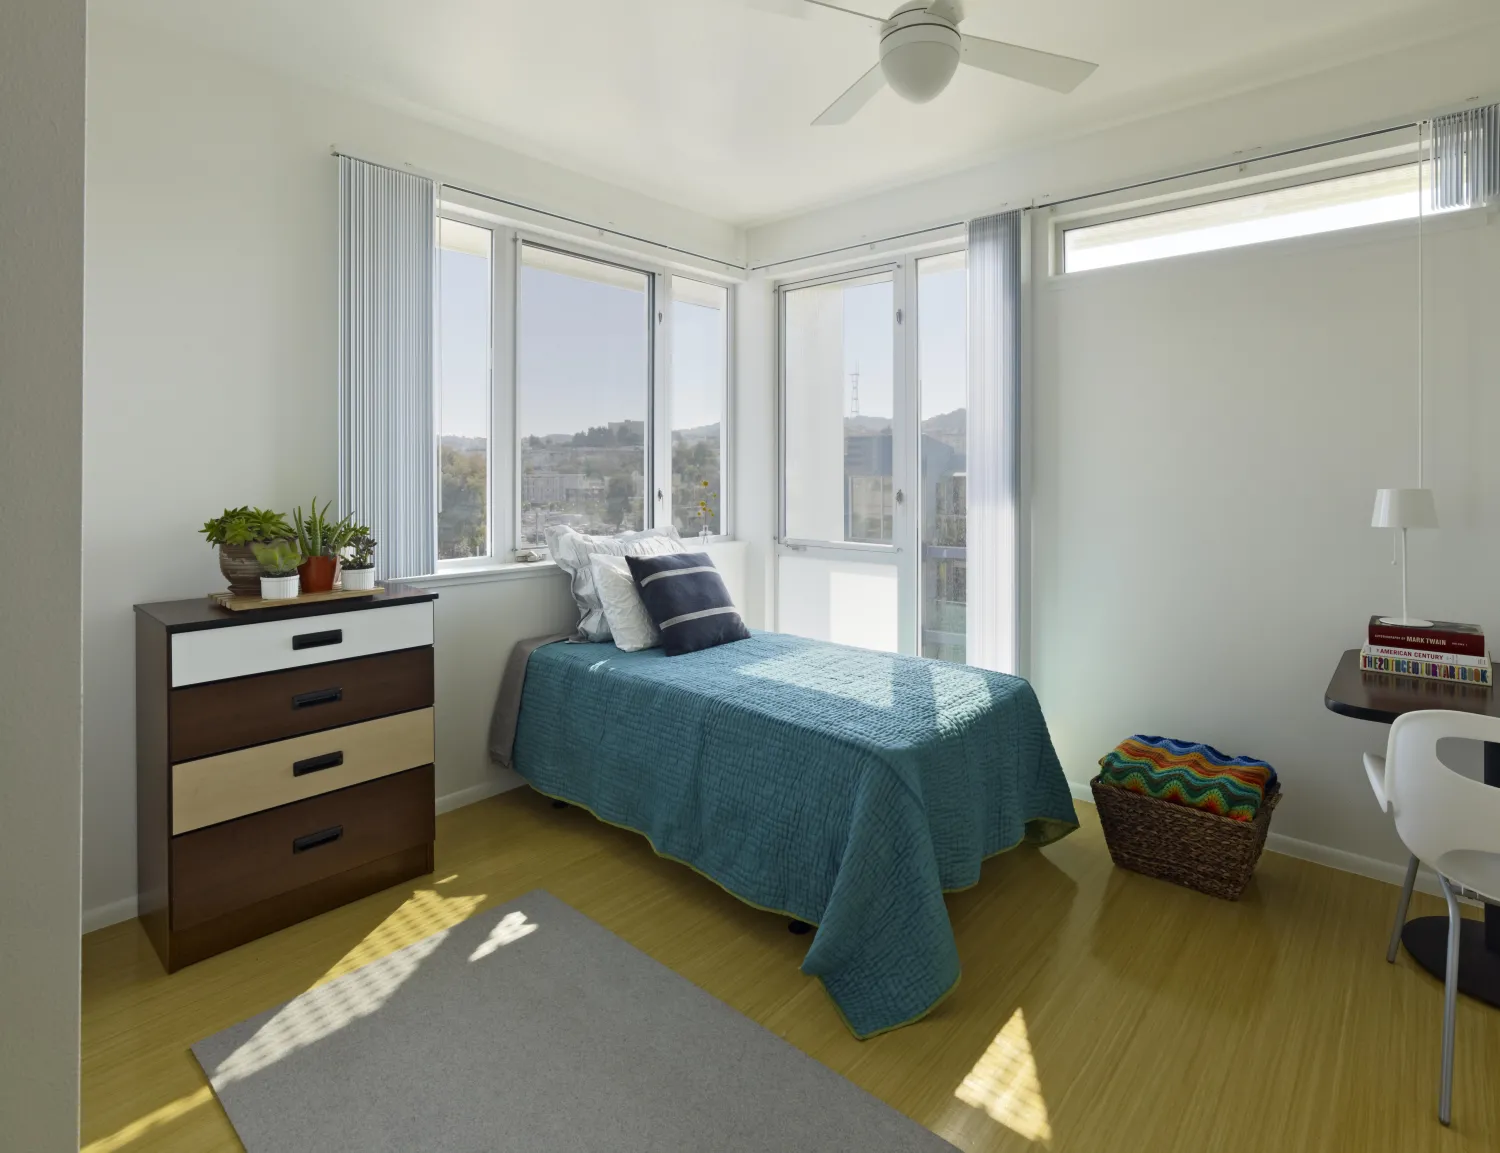 Interior of furnished studio apartment at Richardson Apartments in San Francisco.